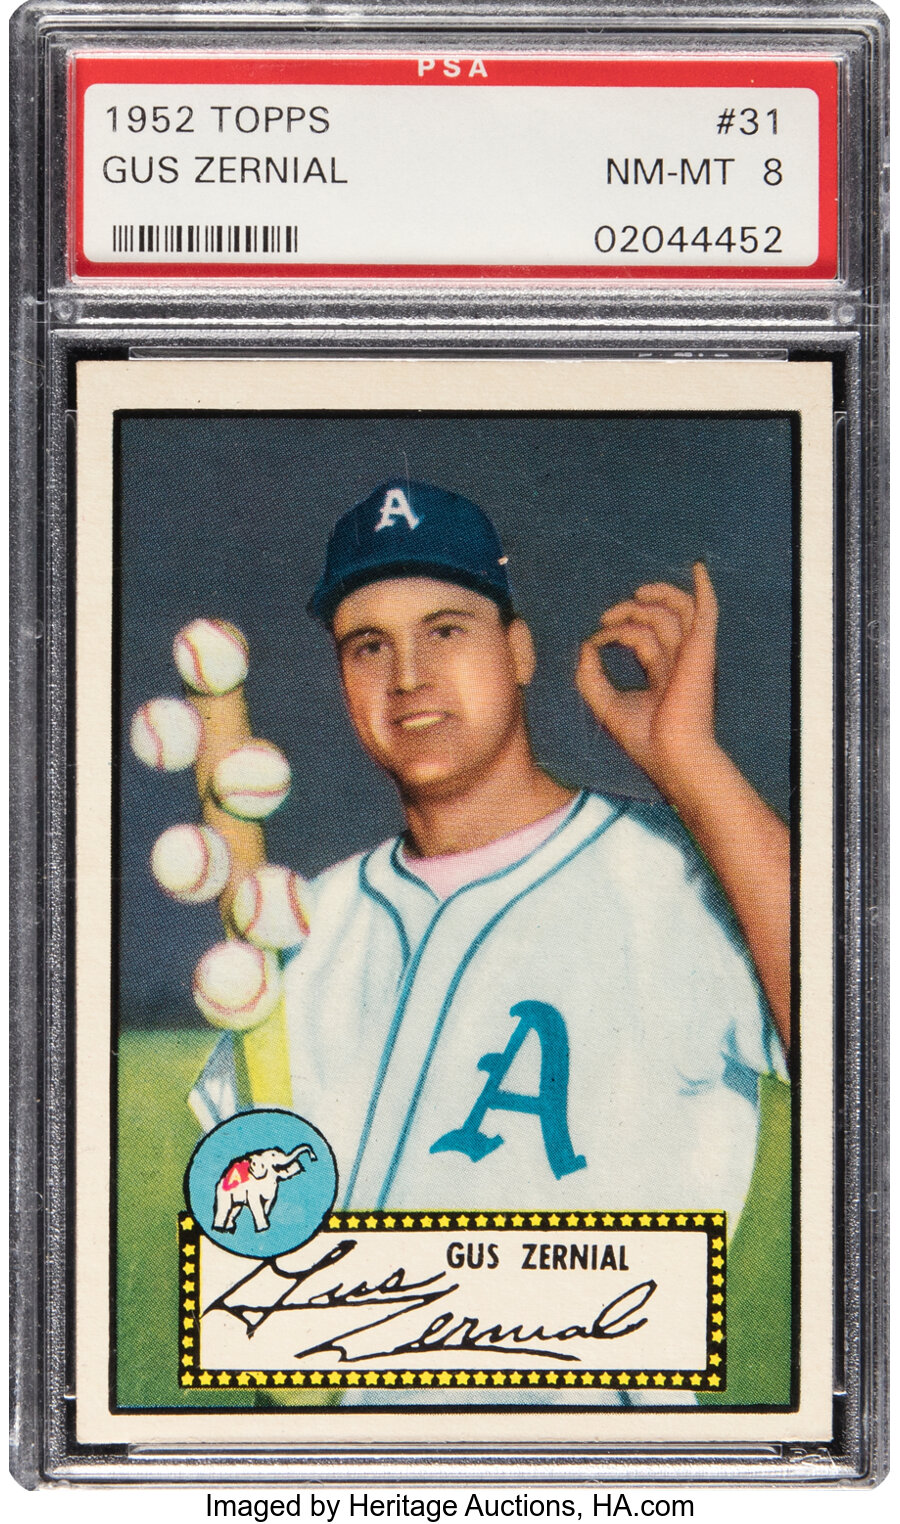 1952 Topps Gus Zernial #31 PSA NM-MT 8 - Only One Higher!